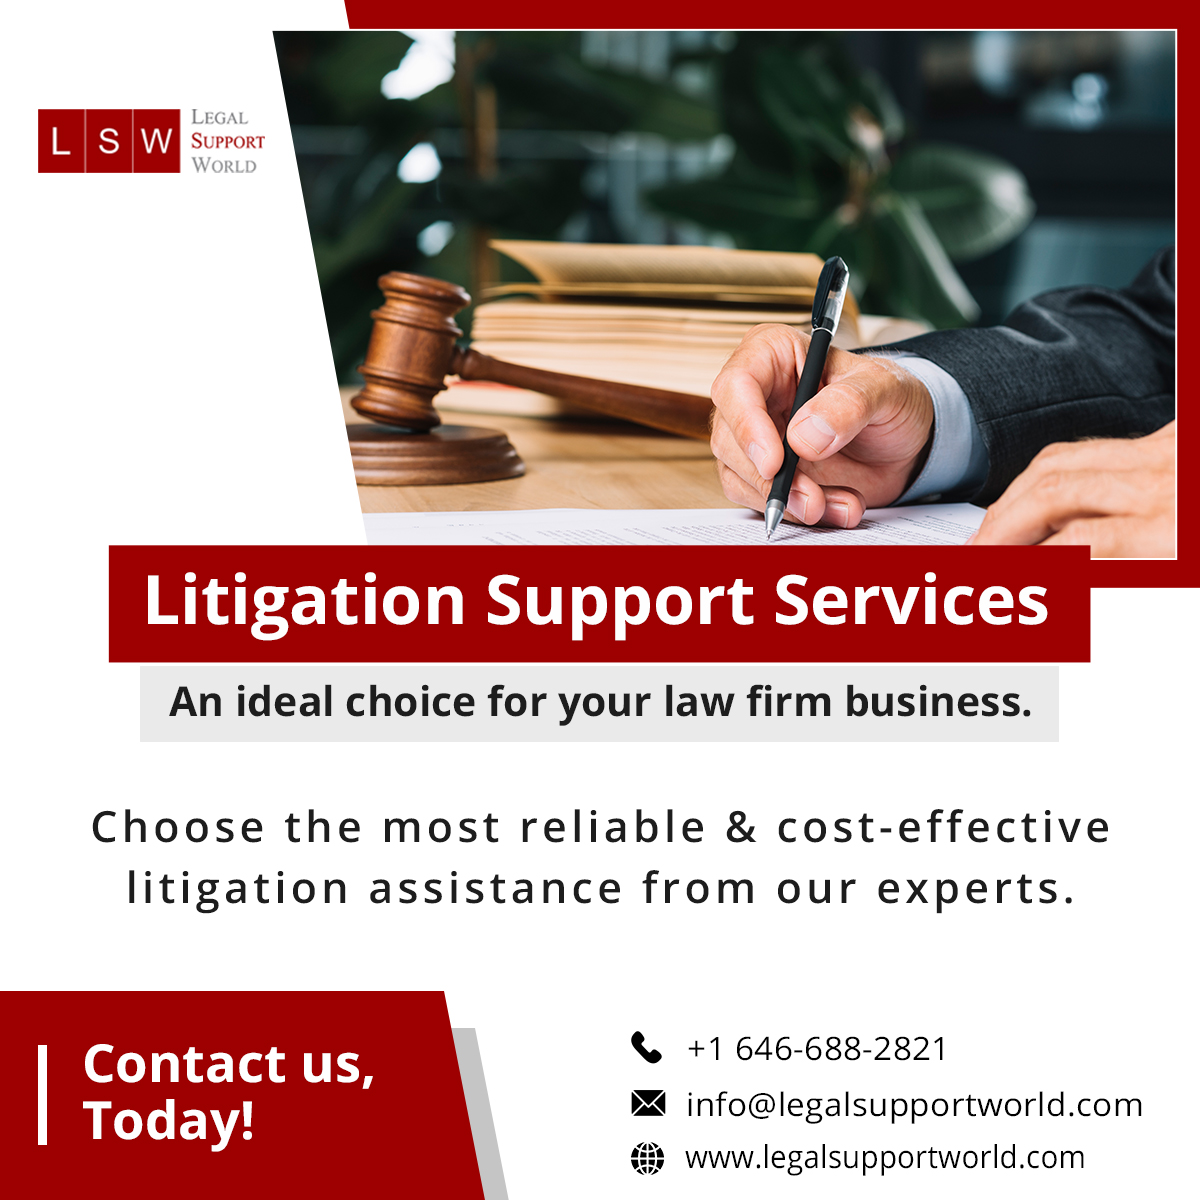 Litigation Support Services

An ideal choice for your law firm business.

Choose the most reliable &amp; cost-effective
litigation assistance from our experts.

&amp; +1 646-688-2821

XX info@legalsupportworld.com

Contact us,

Today!

 

#8 www.legalsupportworld.com